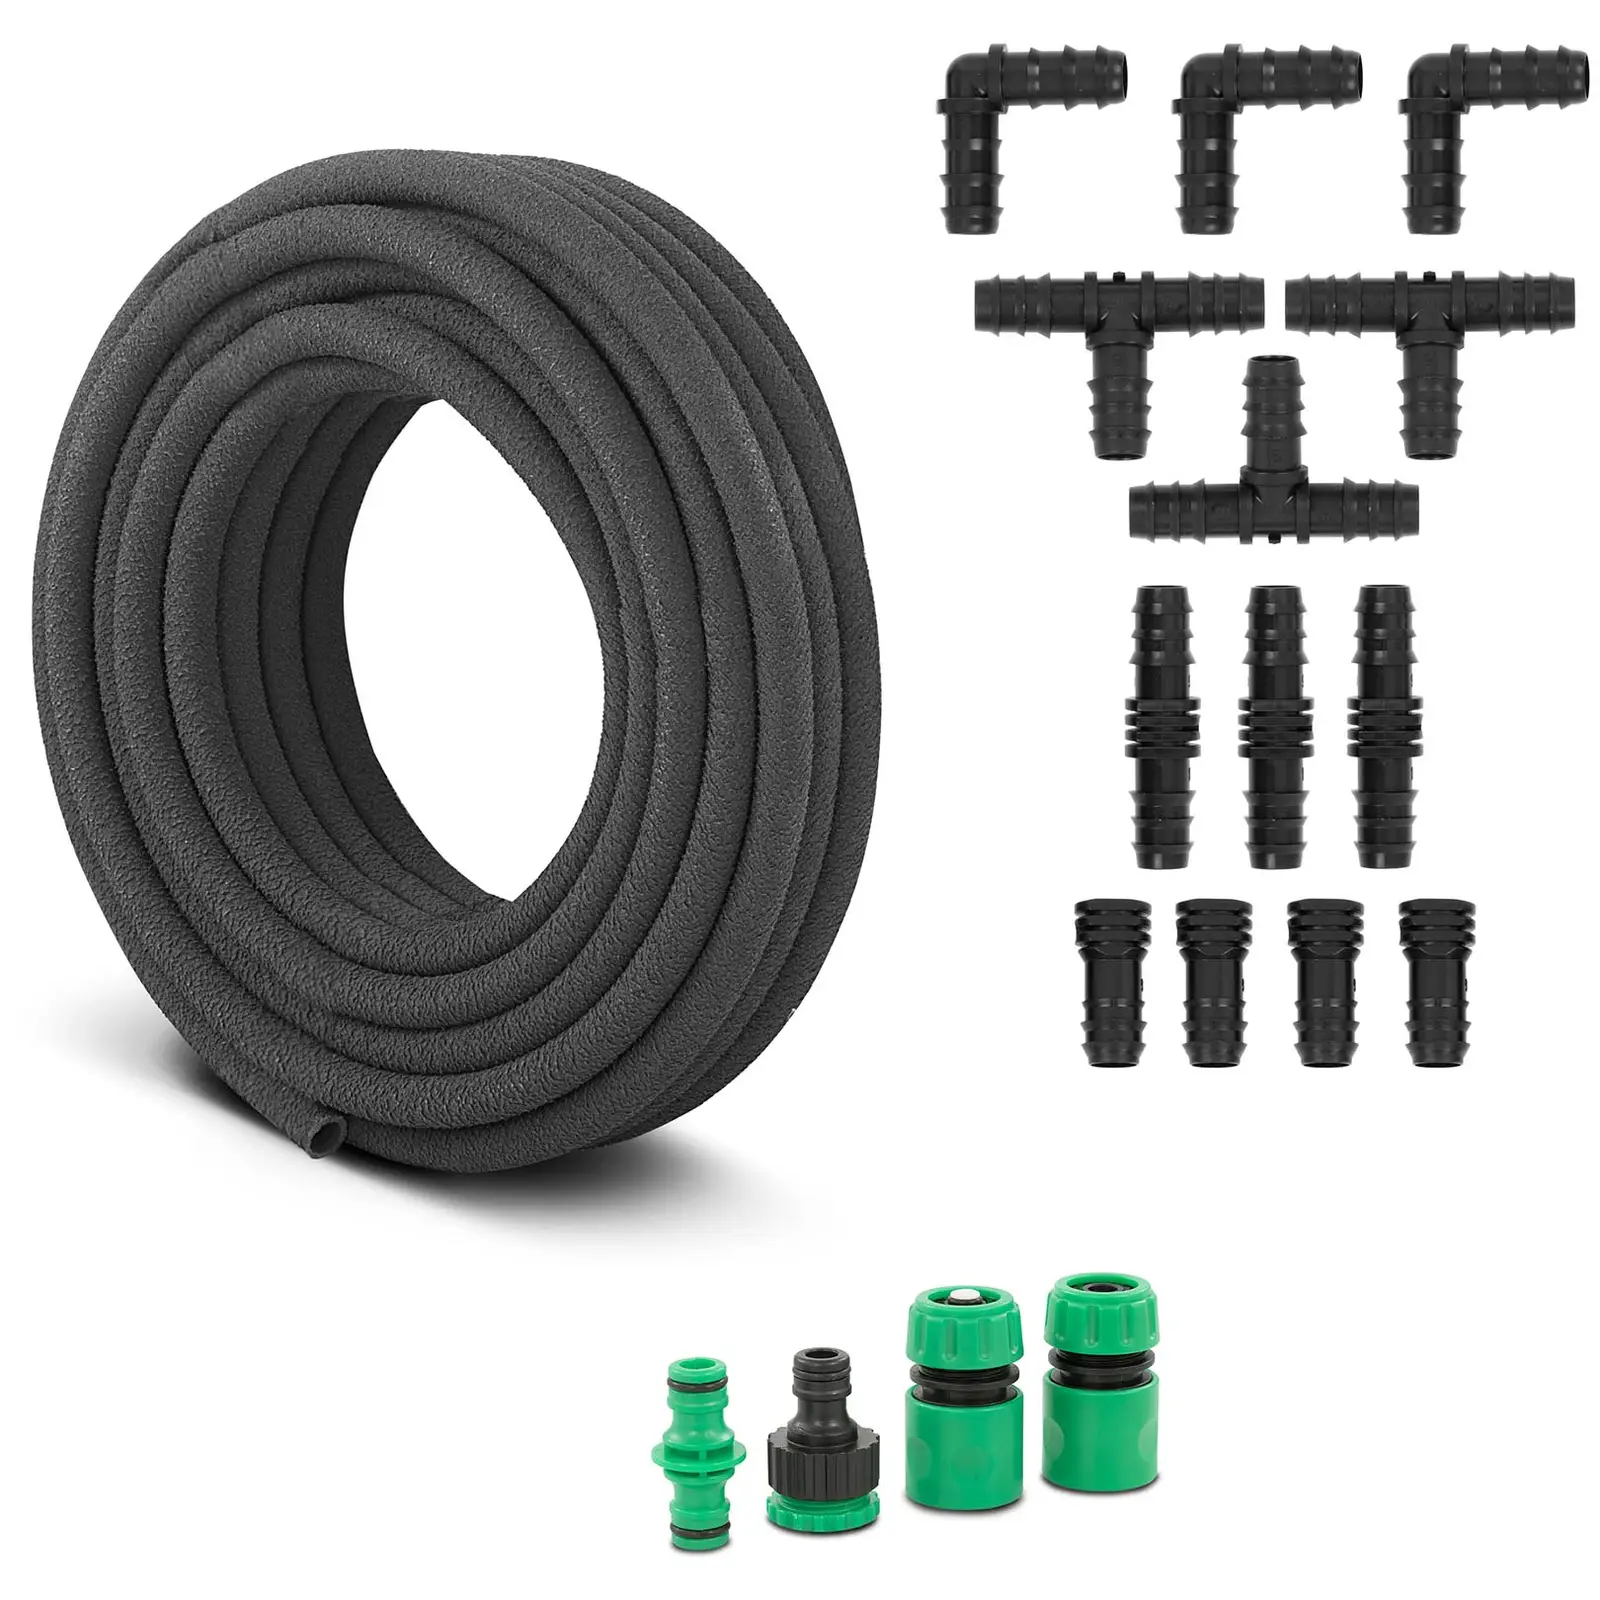 Drip hose - 15 m - with tap piece, spout and various connections